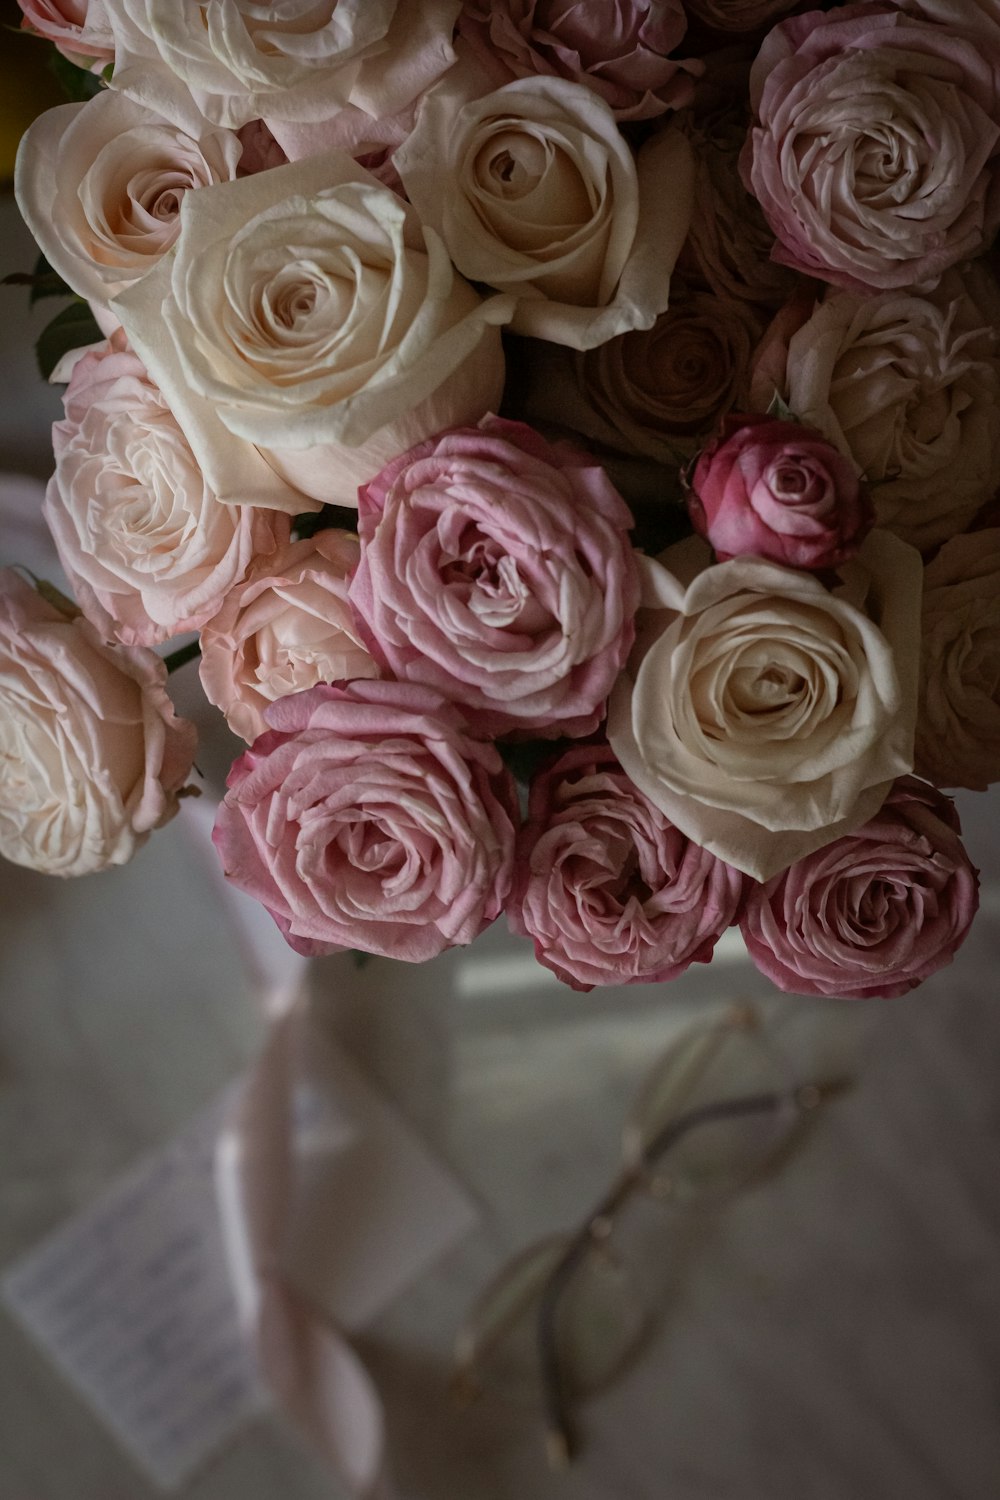 a bouquet of pink and white roses in a vase